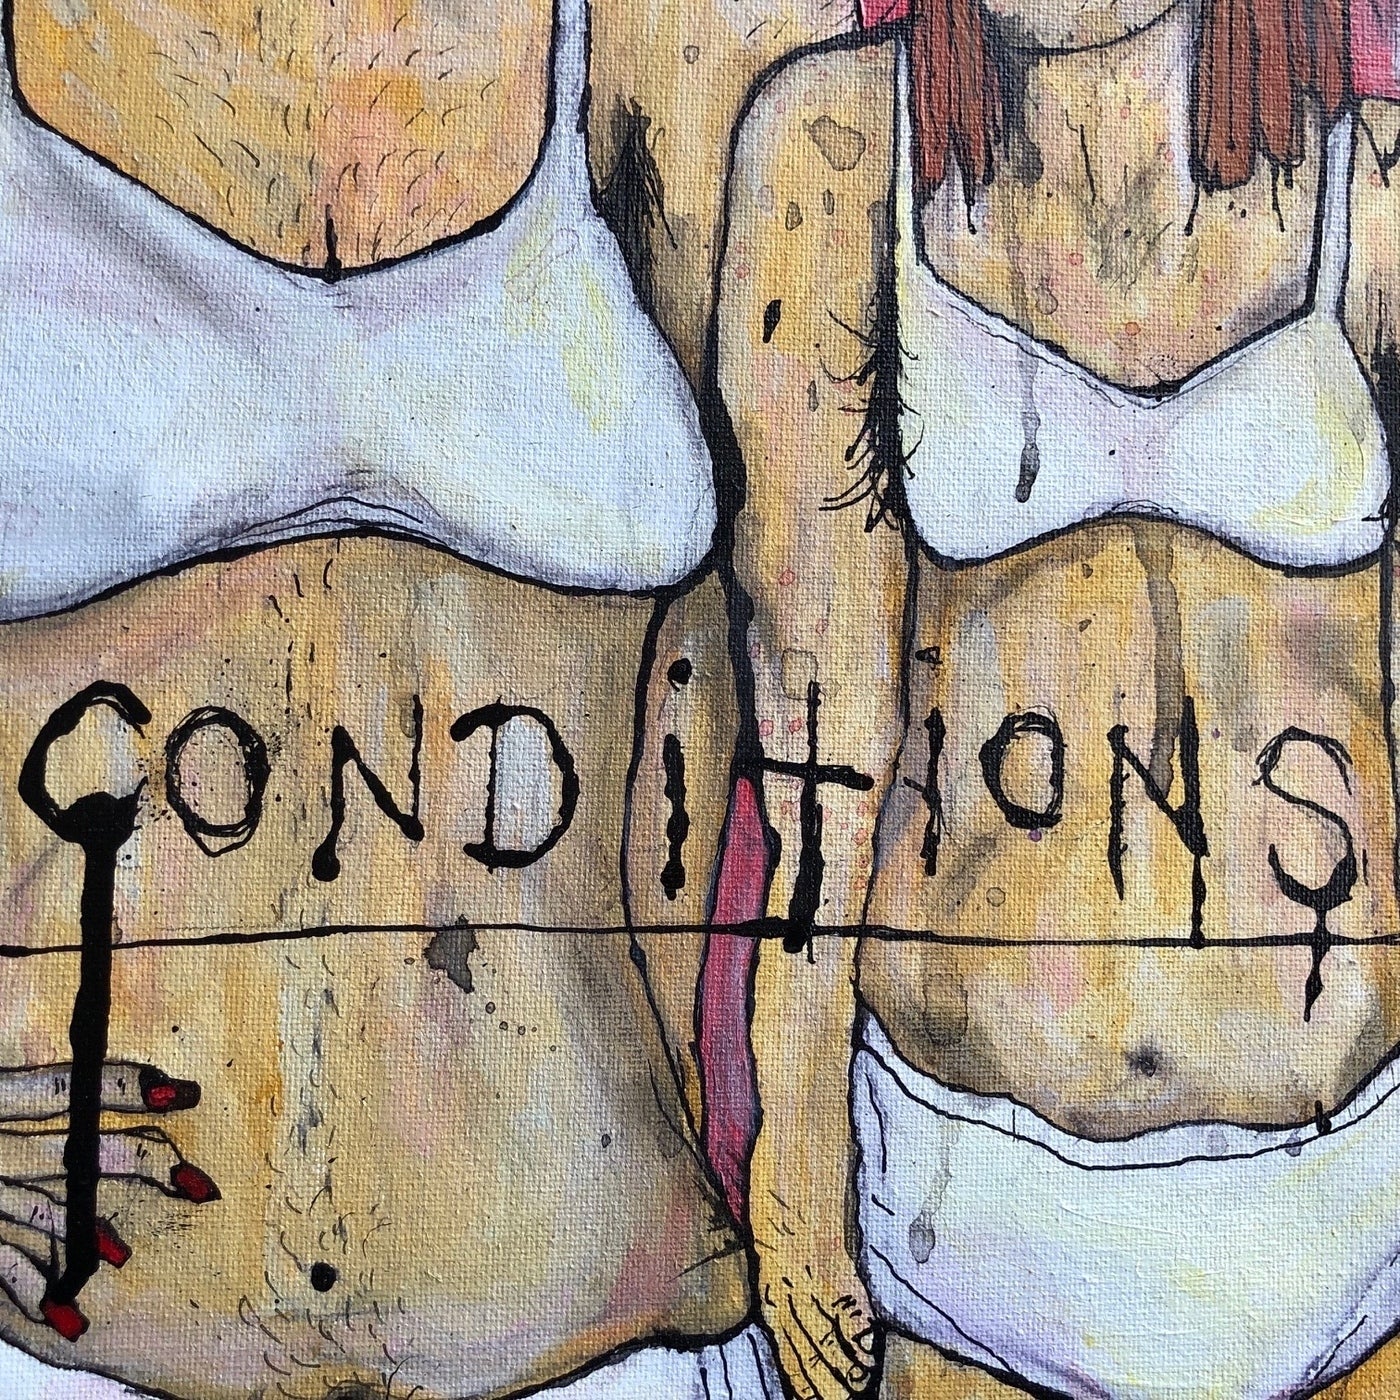 Conditions.